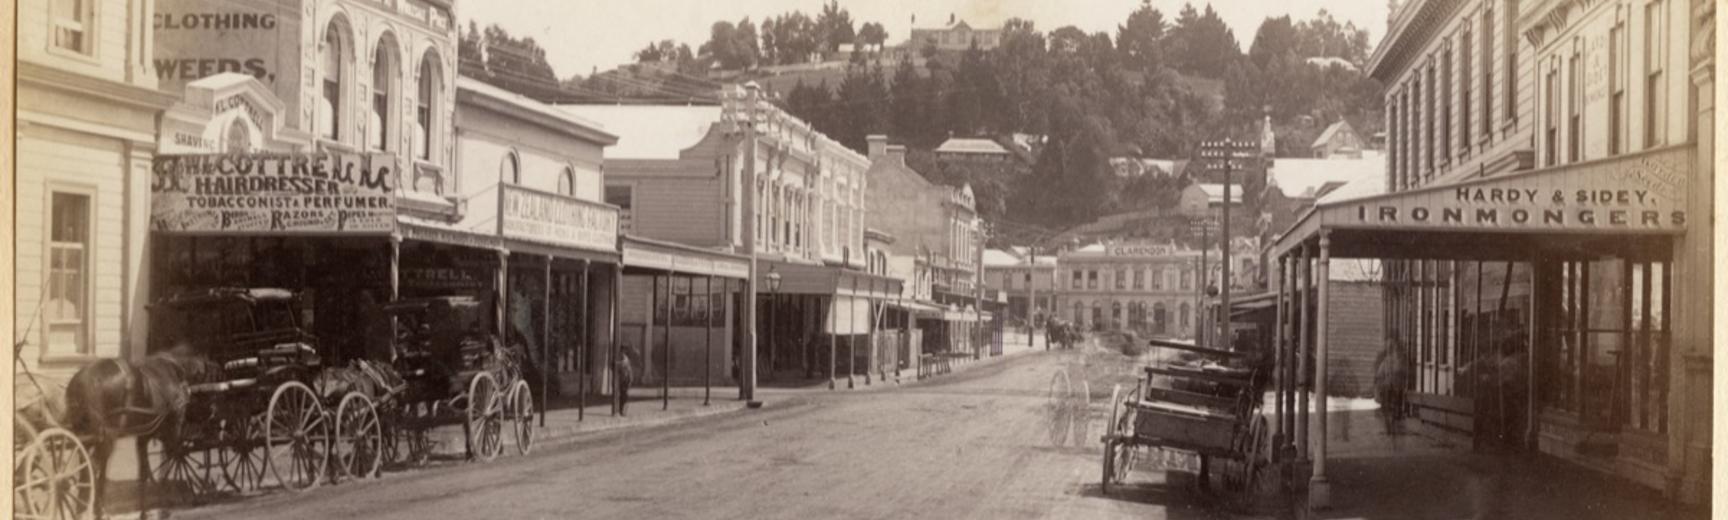 Horse-drawn vehicles stationed outside buildings on Hastings Street in Napier. Photograph by Alfred Burton for the Burton Brothers (Dunedin). Napier, North Island, New Zealand. Circa 1885.